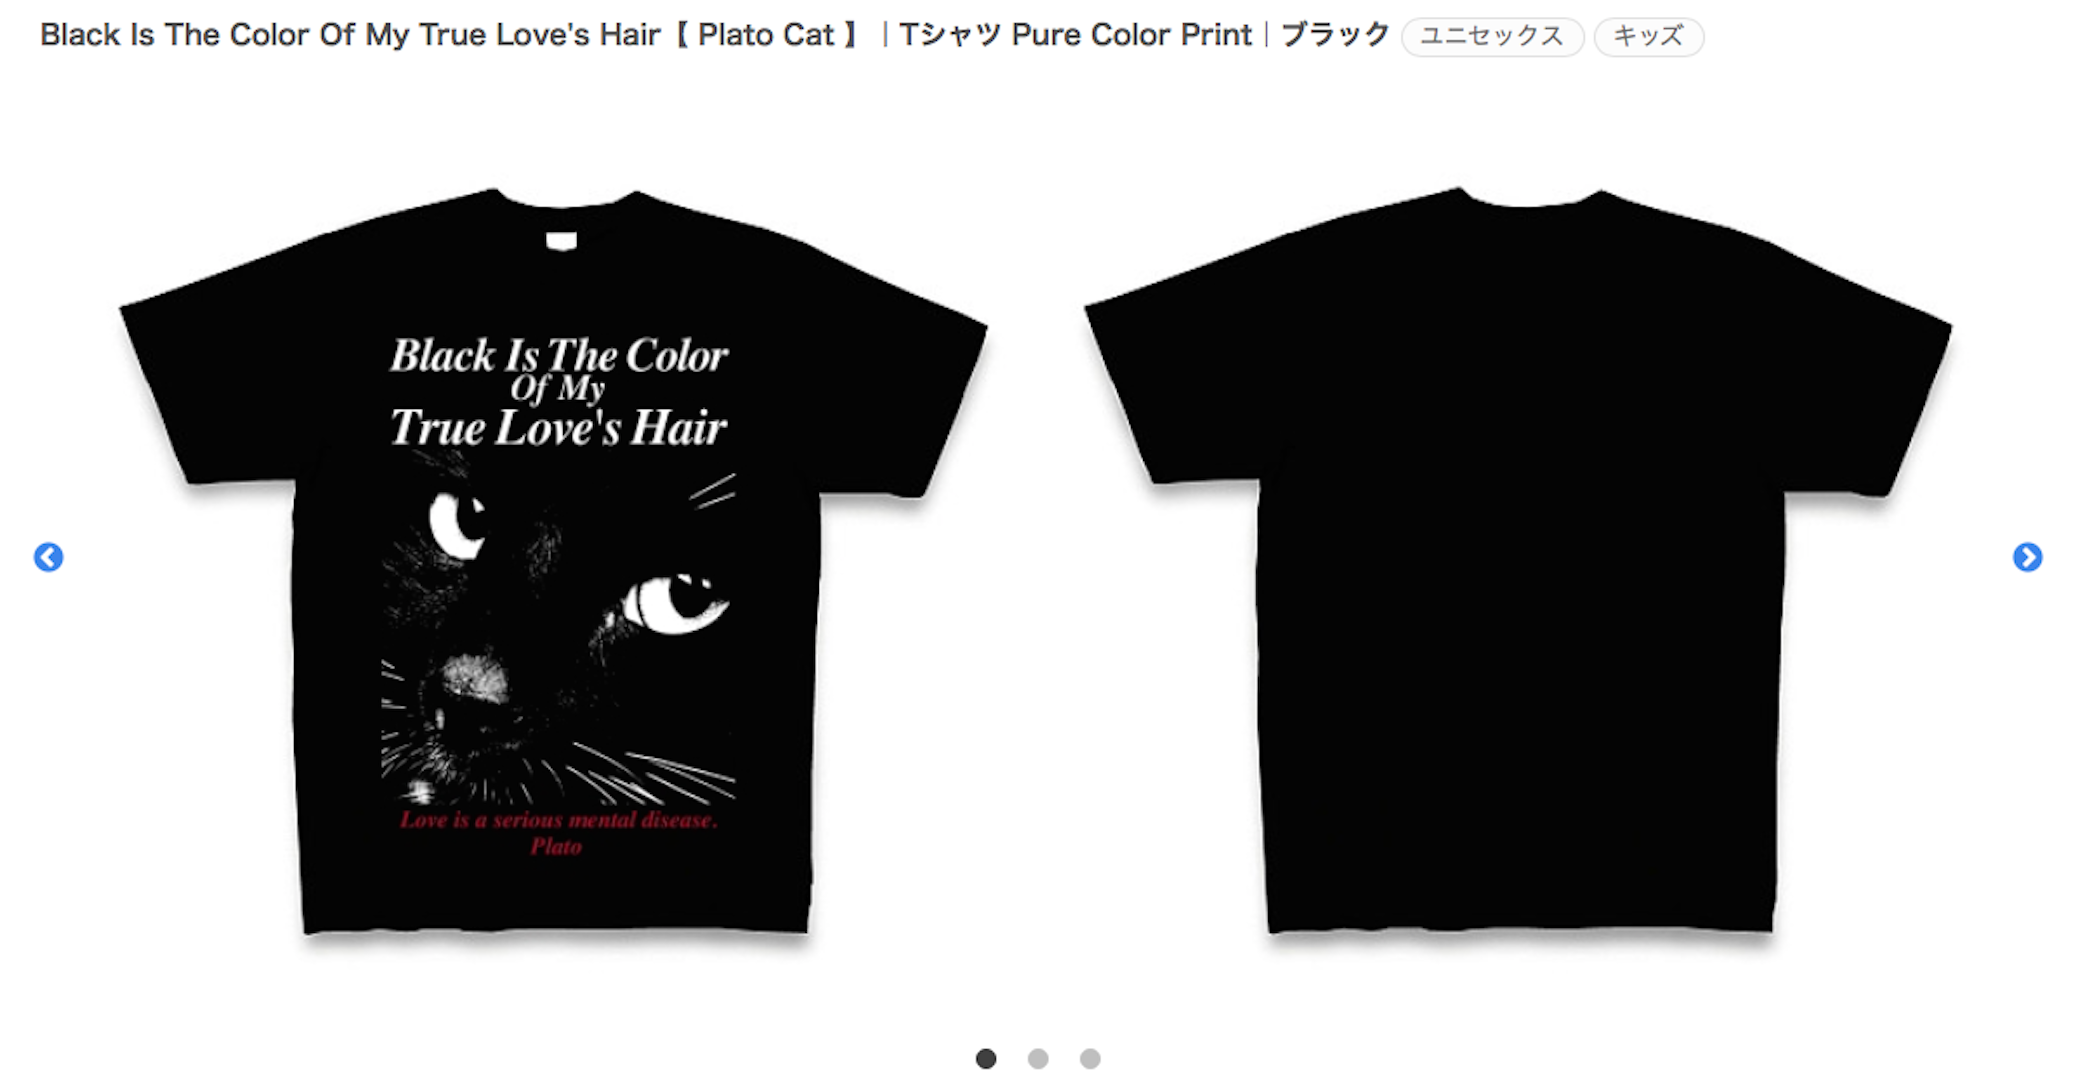 Black Is The Color Of My True Loves Hair【 Plato Cat 】